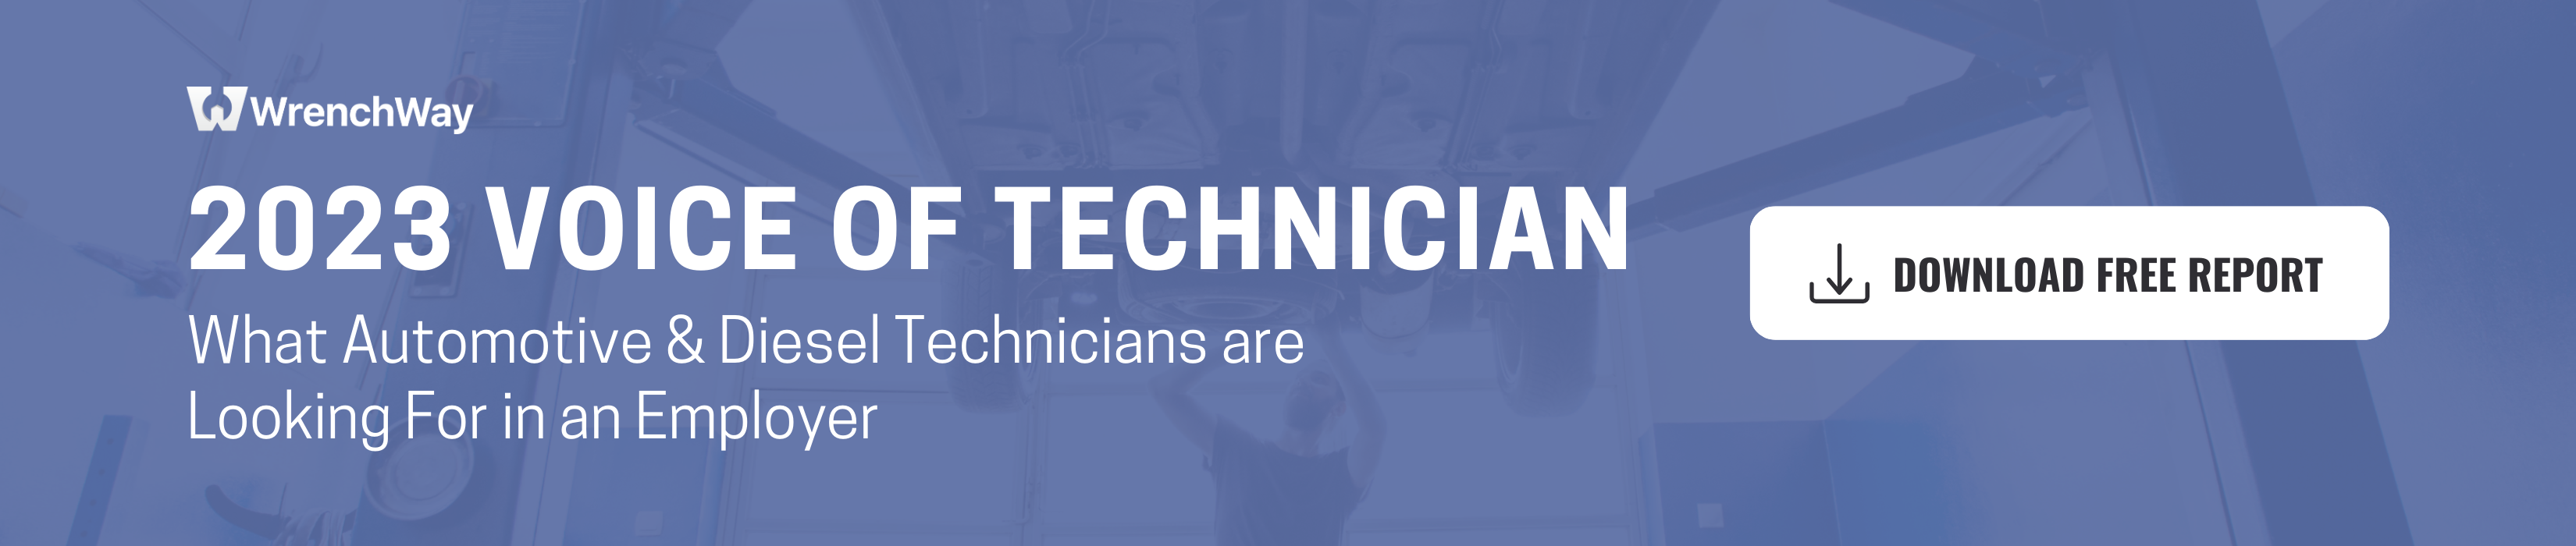 Download the Voice of Technician Report